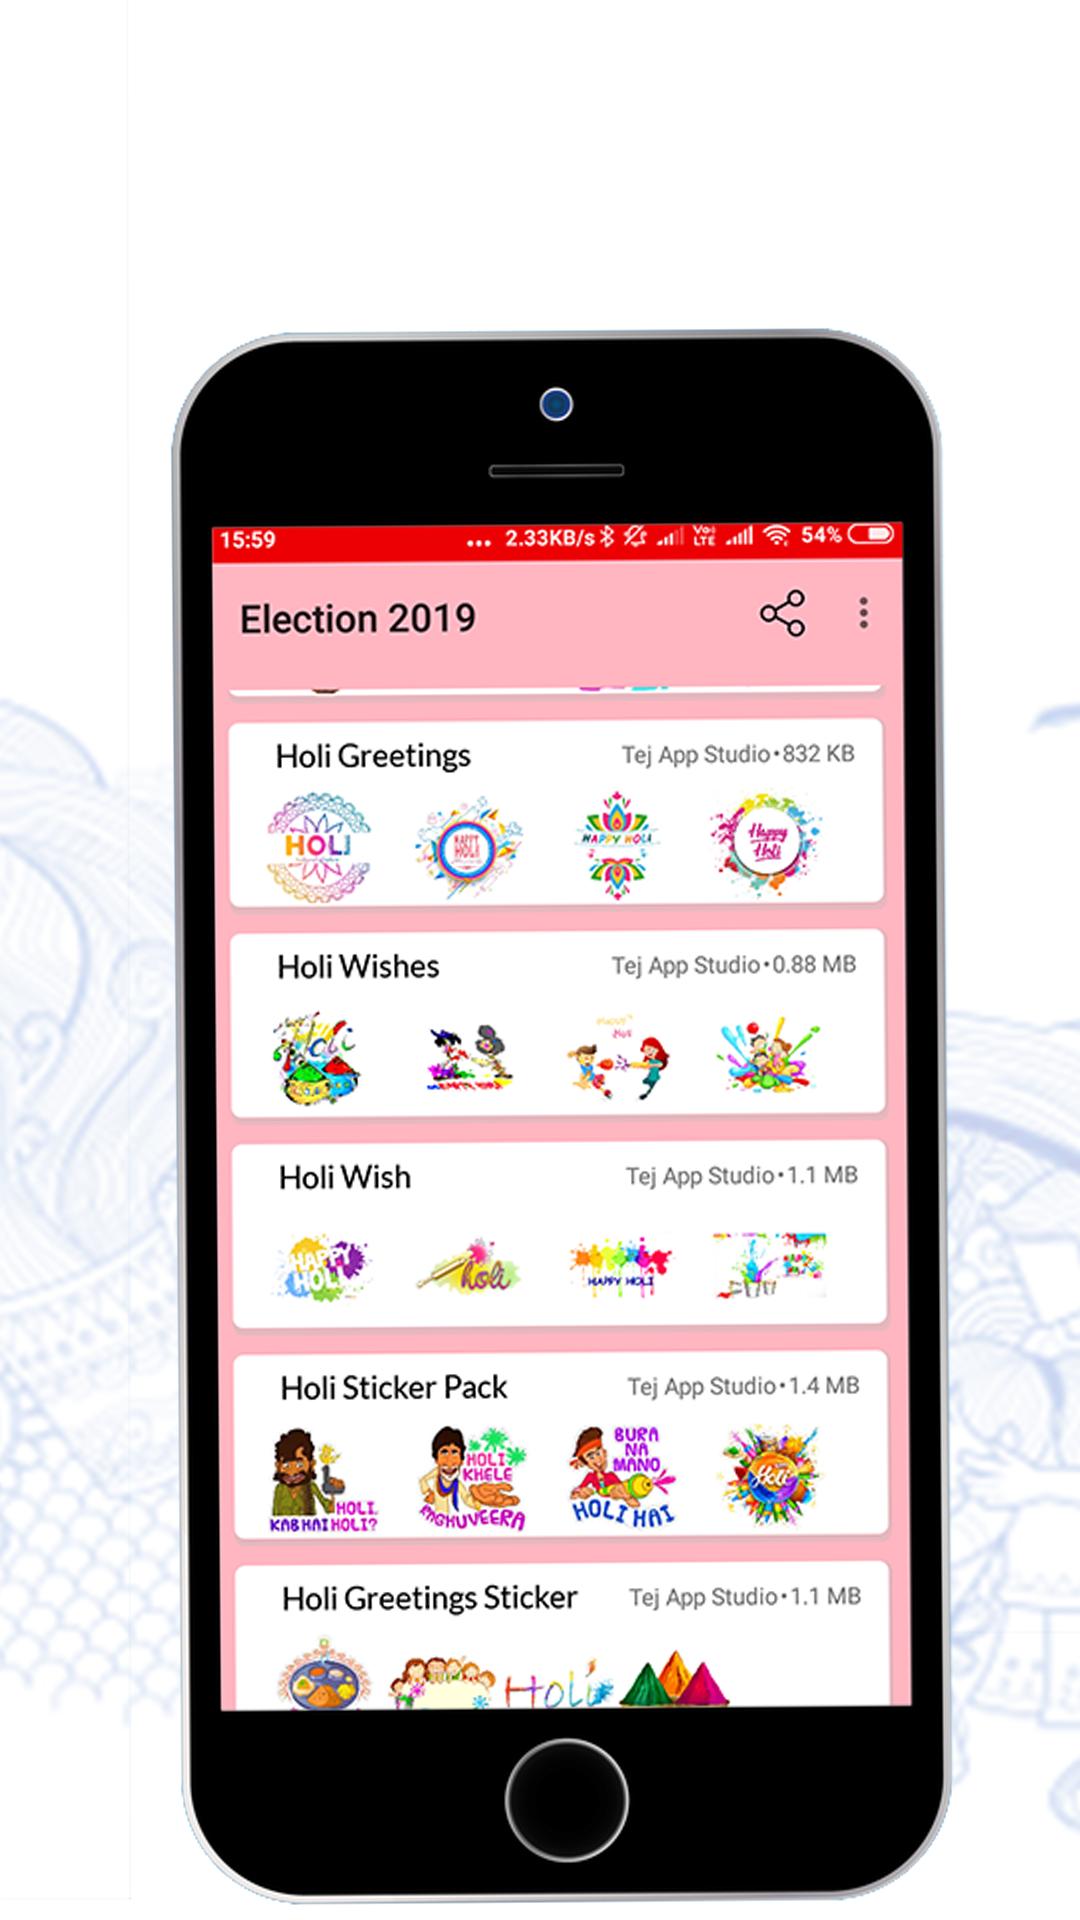 Holi Greetings Sticker For Whatsapp Wa Stickers For Android